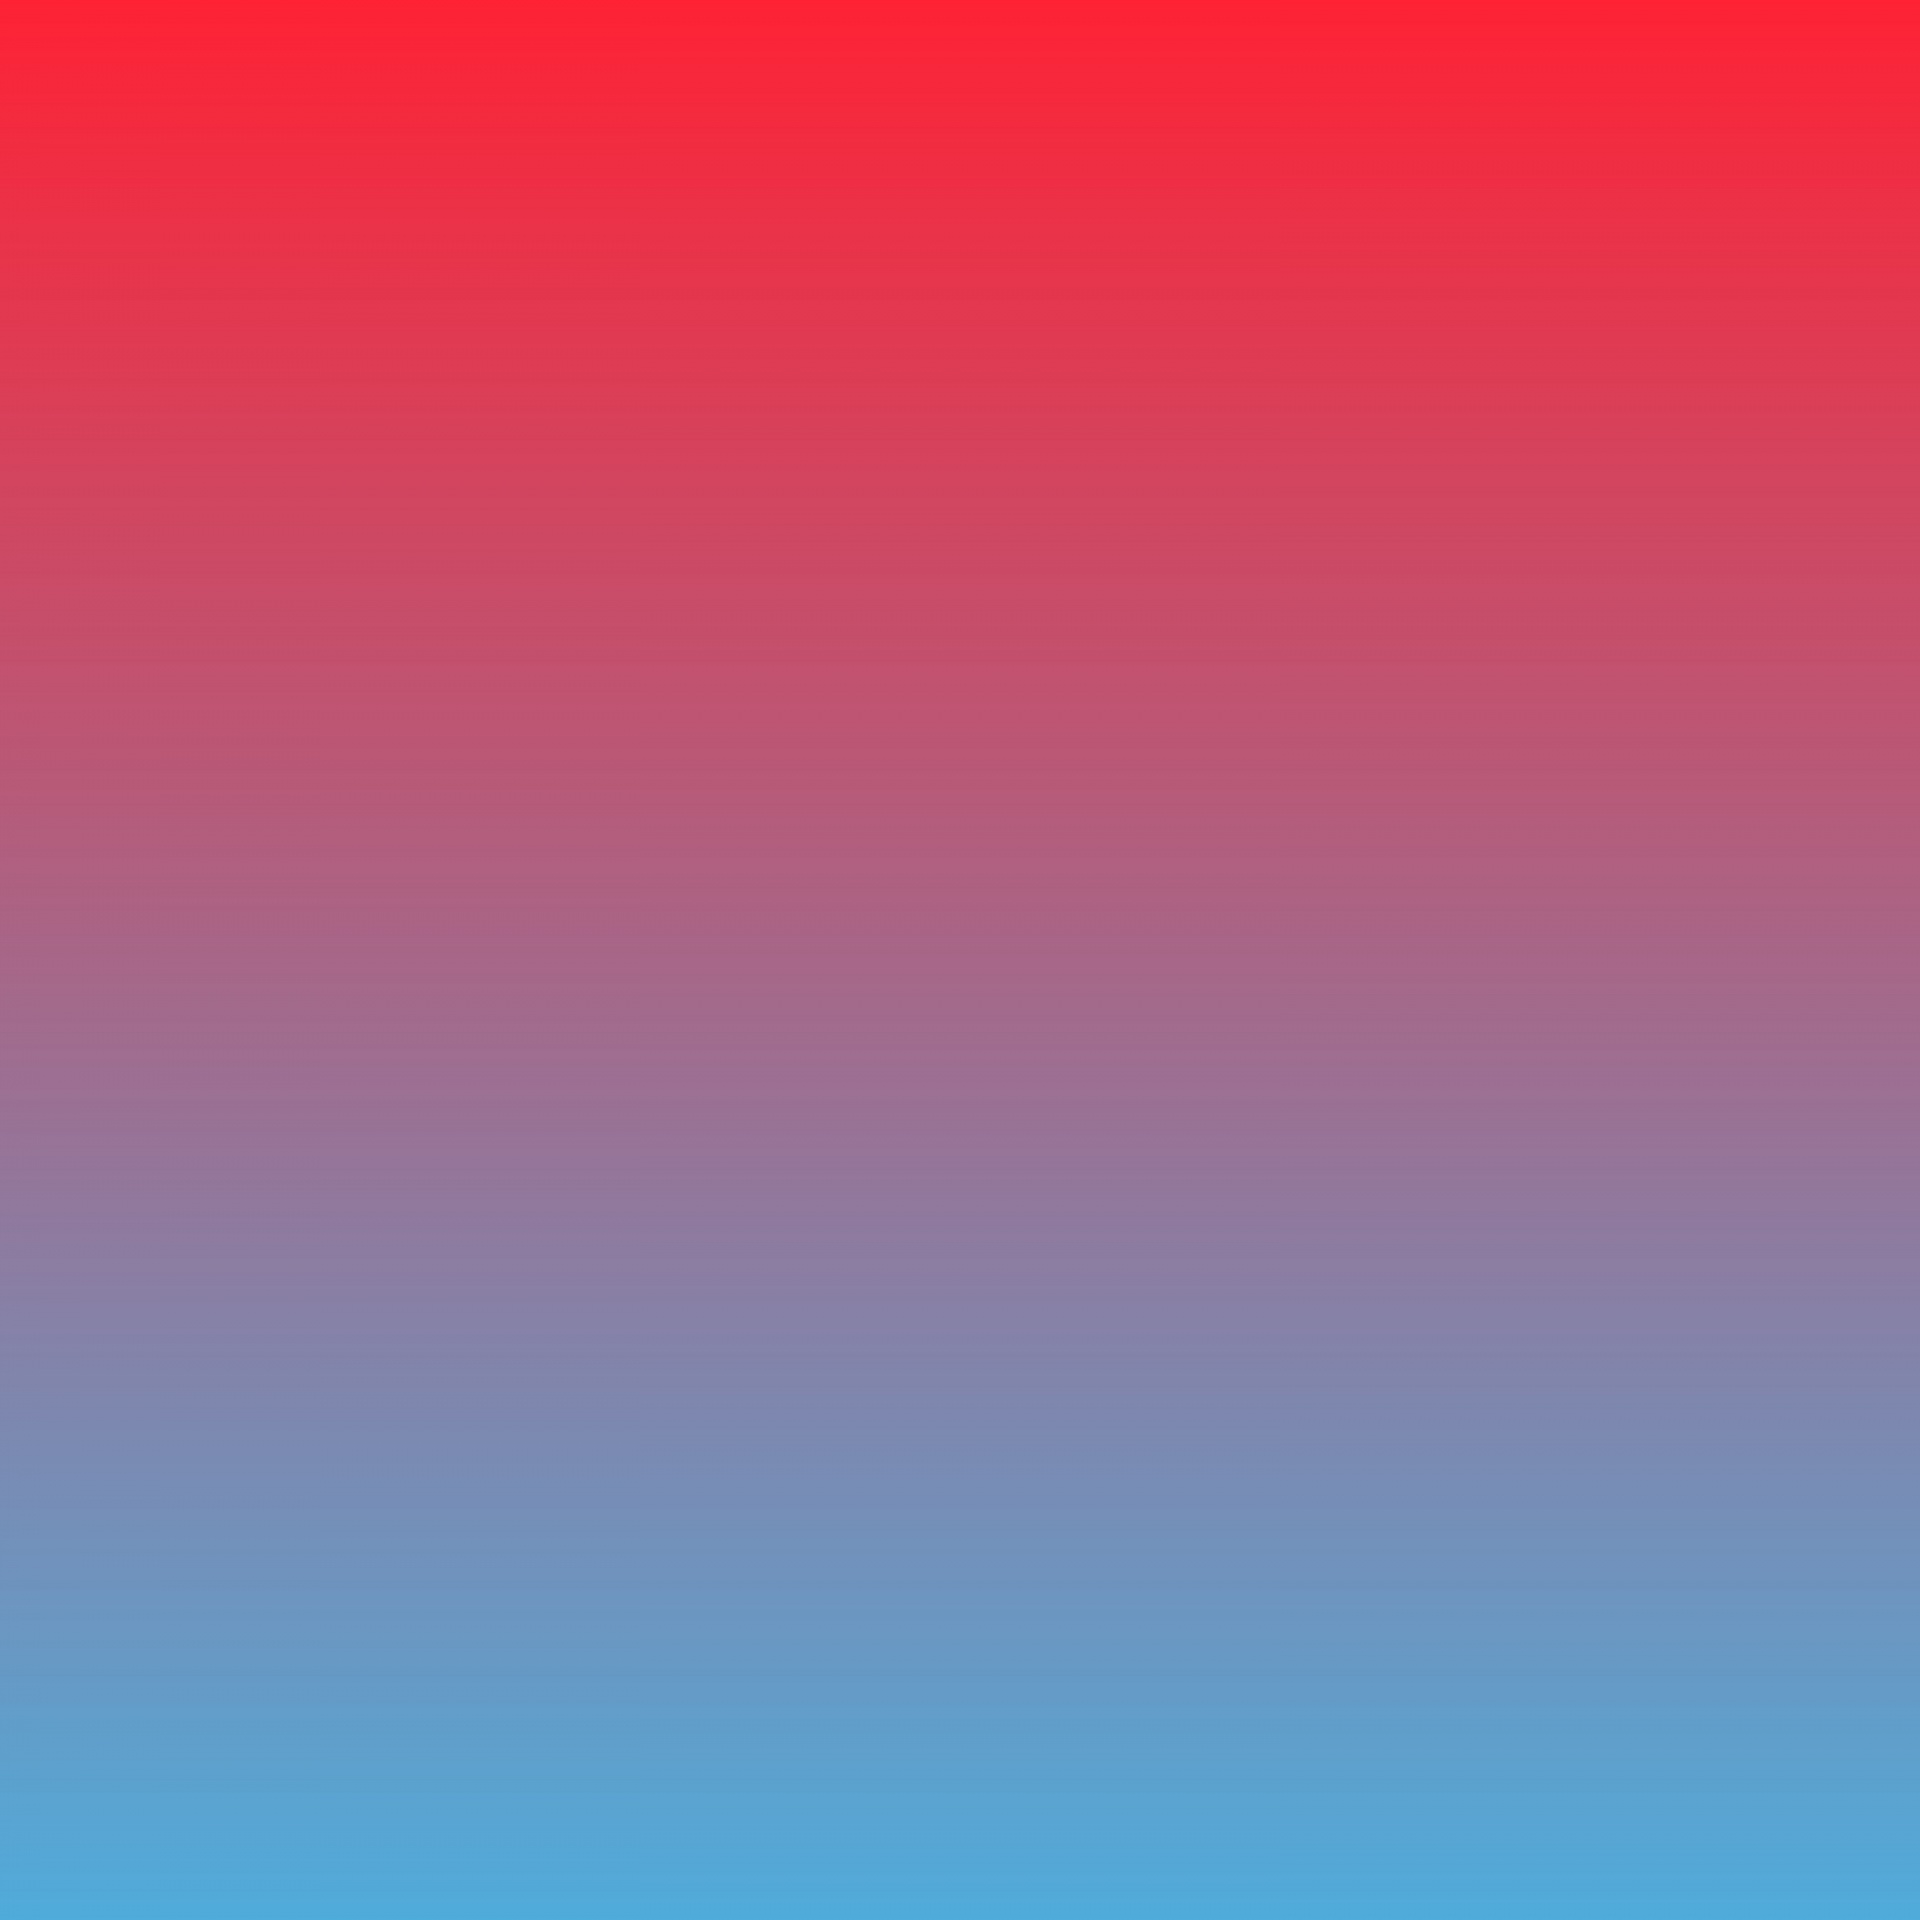 Wallpaper,red,blue,gradient,vertical - free image from 